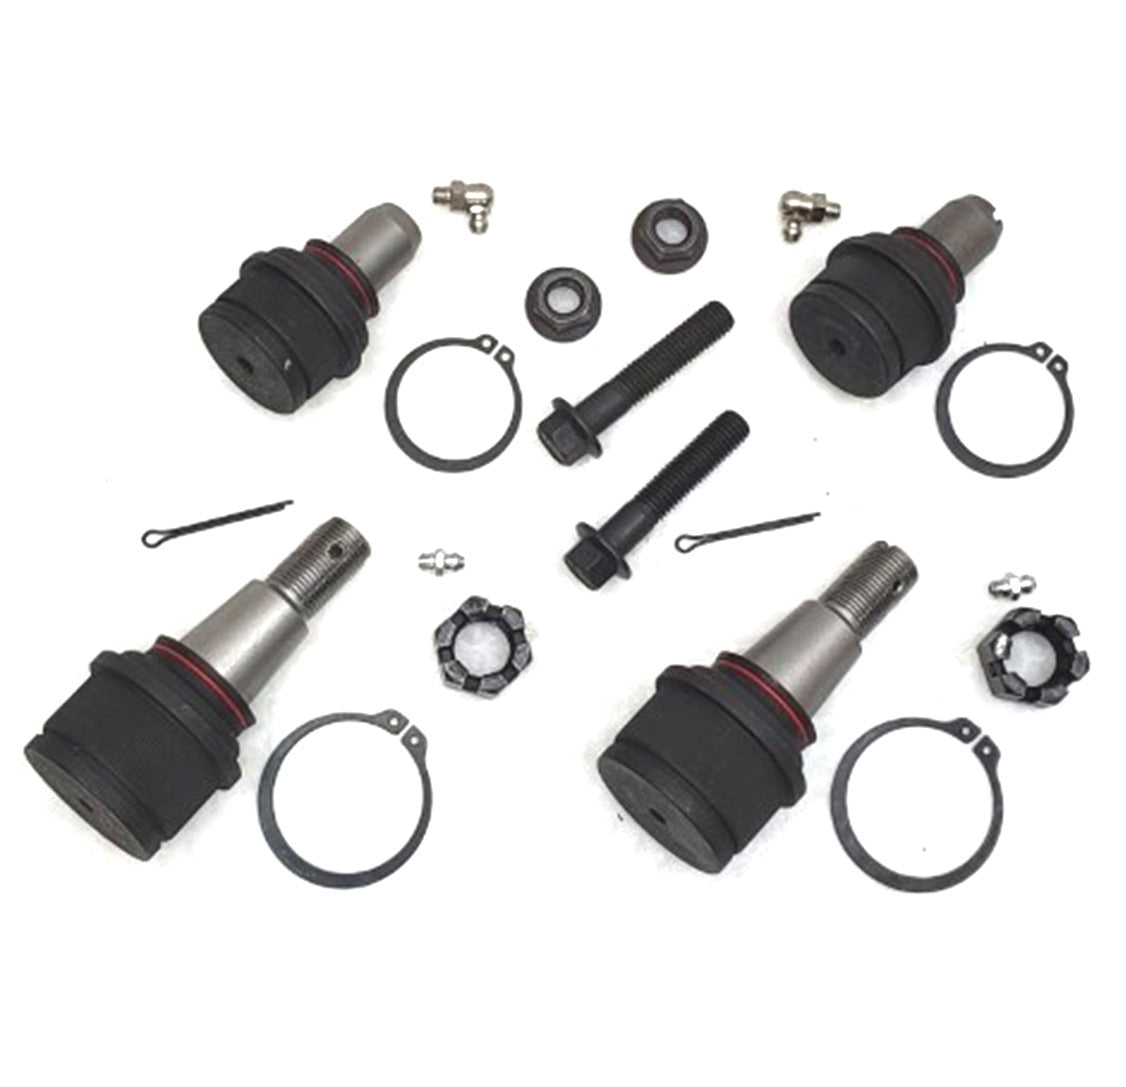 XRF Ford E450 Ball Joints Upper and Lower Suspension Kit 1999 - 2019